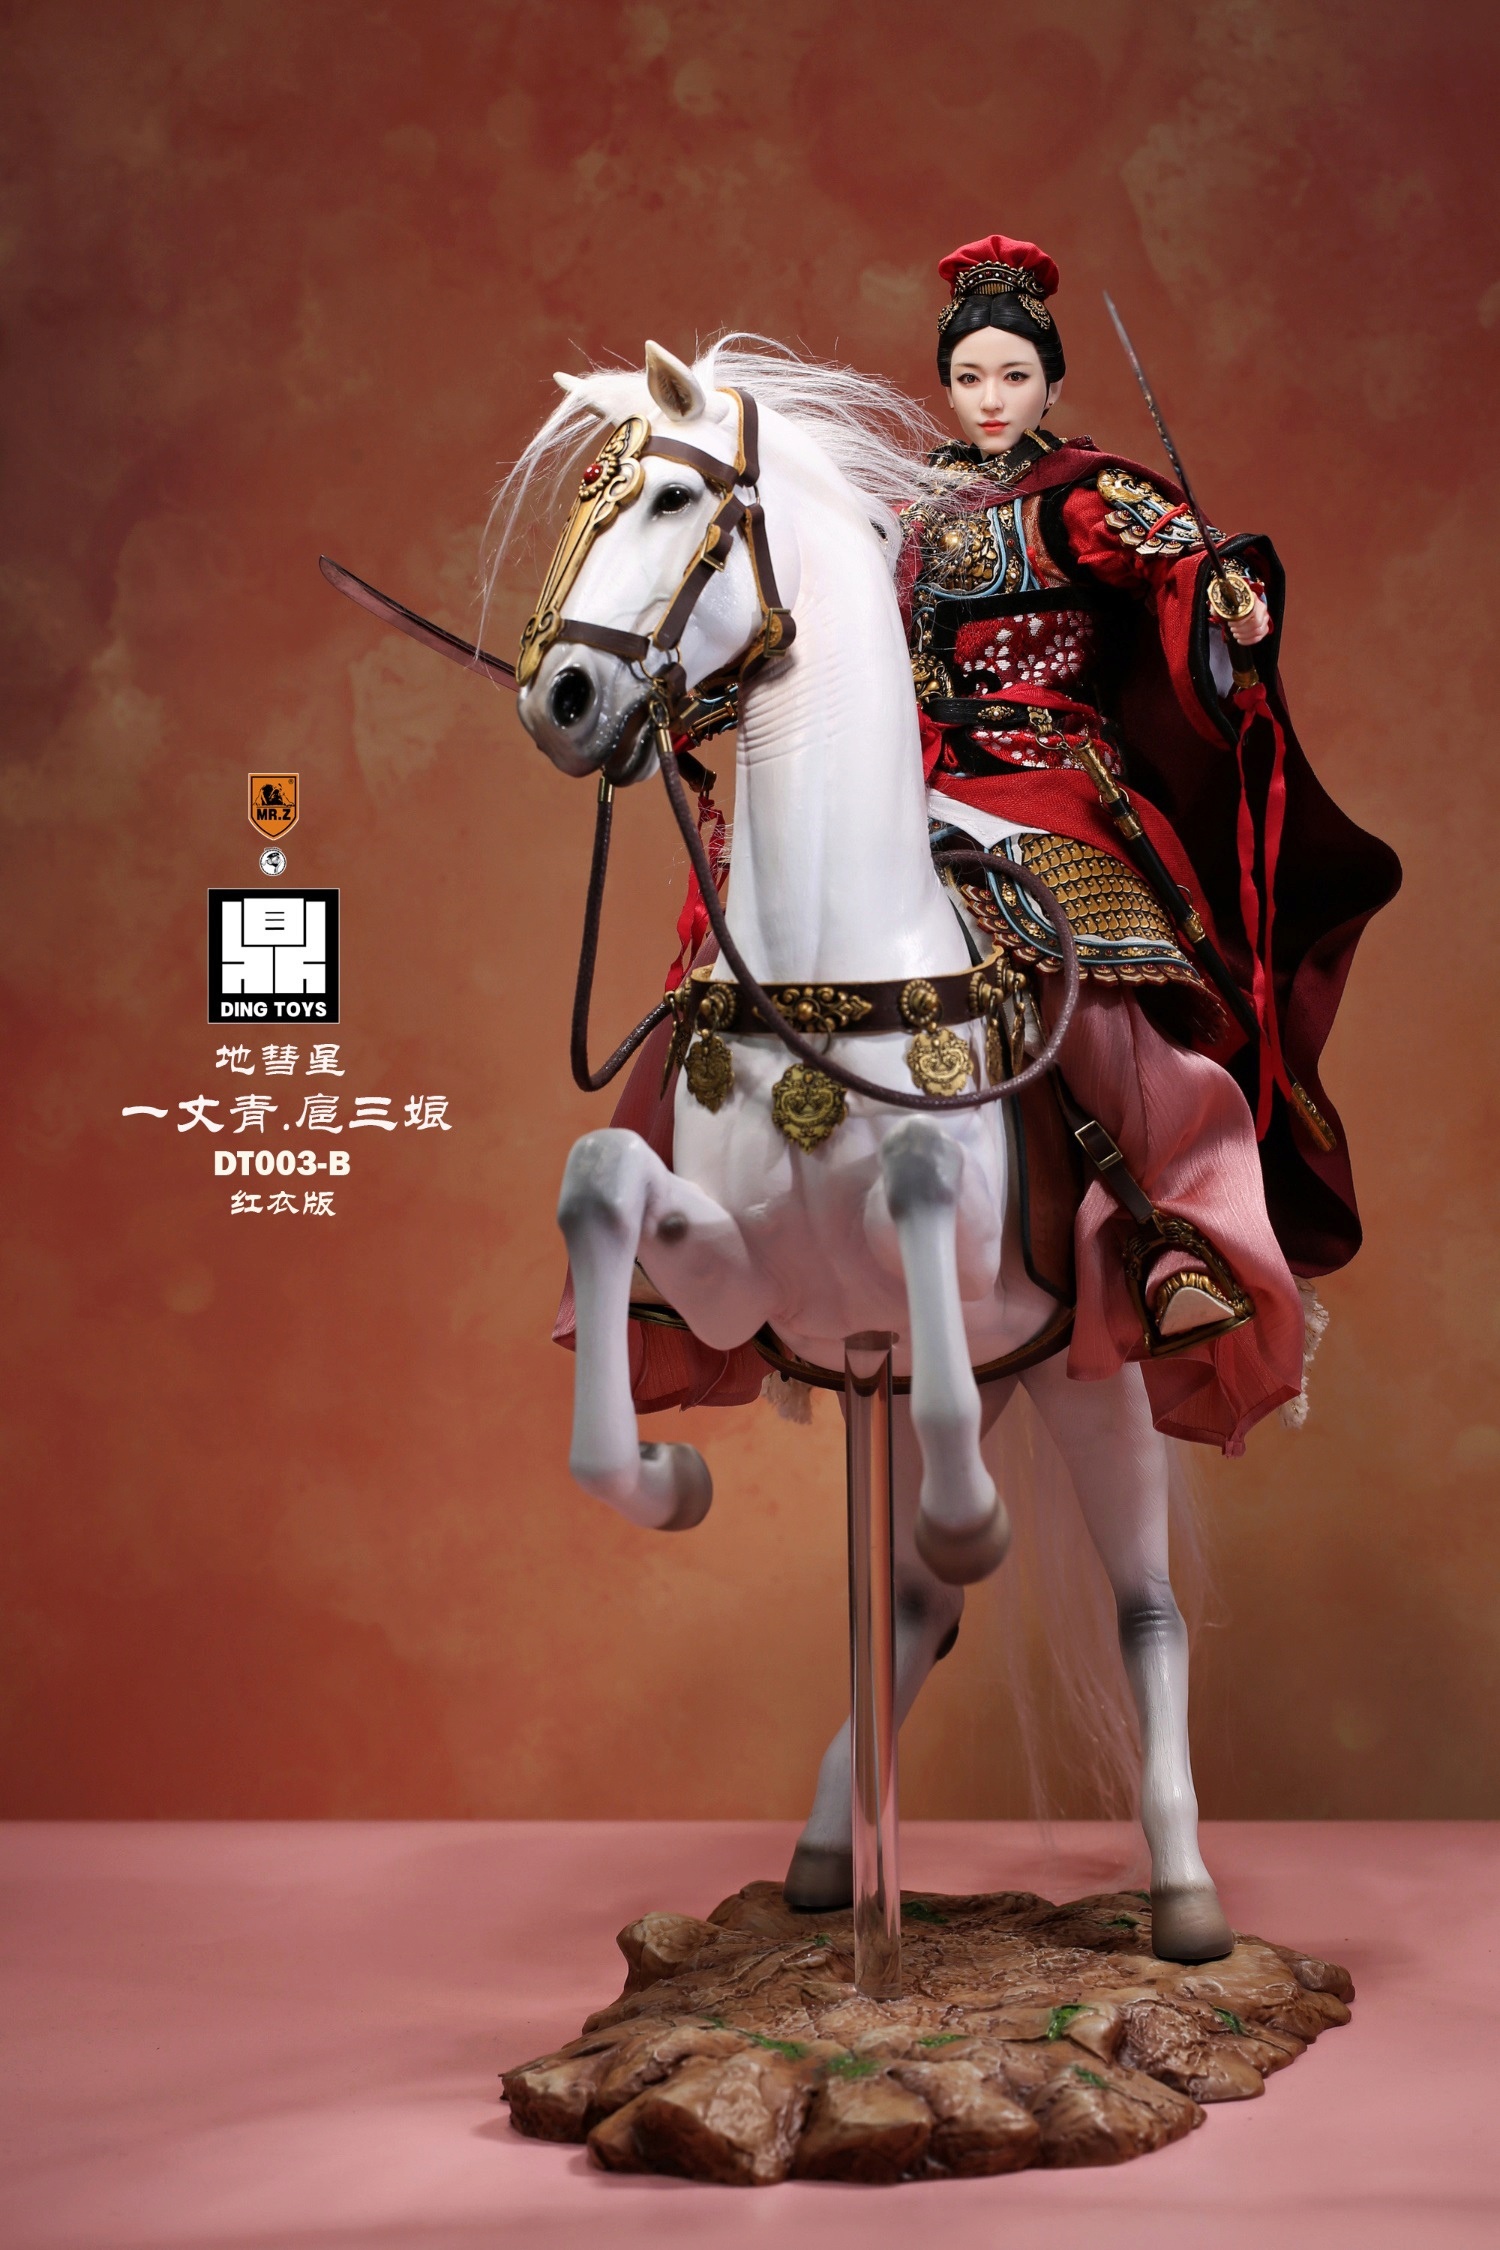 NEW PRODUCT: Mr.Z x Ding Toys DT003 1/6 Scale 《Water Margin》Shiying Zhang (Green and Red versions), Horse (White) 4021